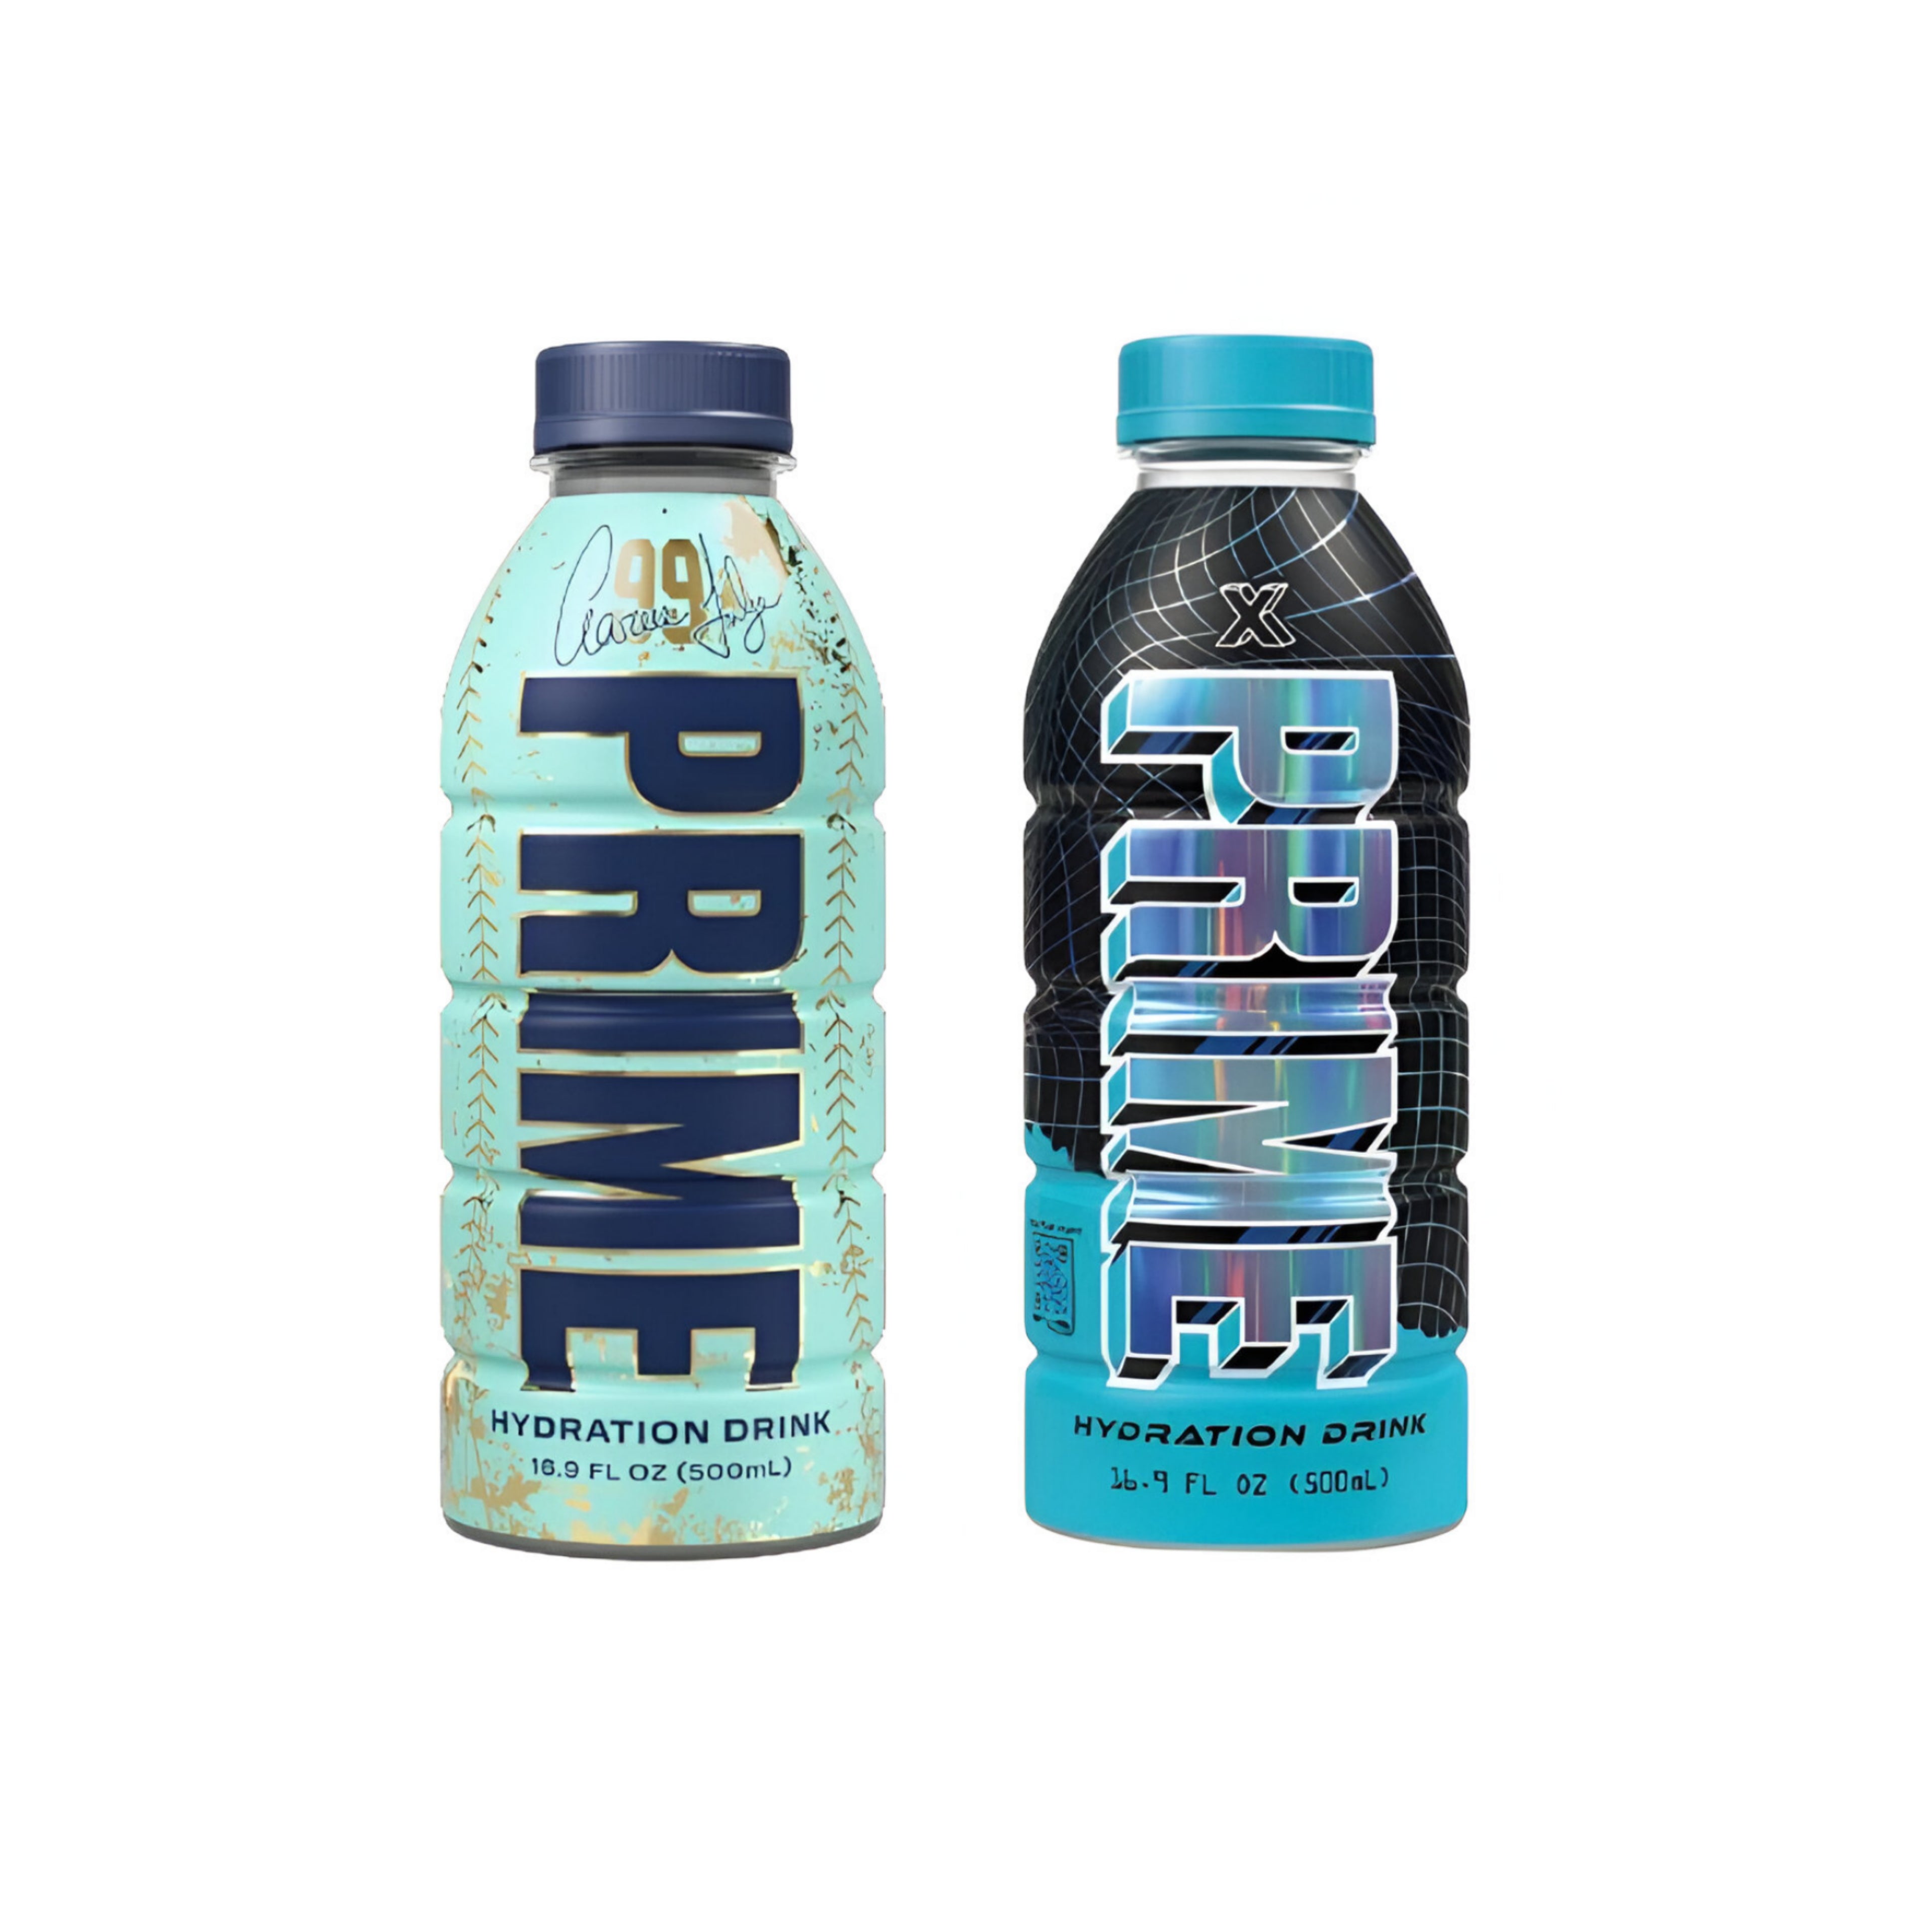 Prime Hydration Aaron Judge Blue  And 'X' Limited Edition - 500ml - Pre Order